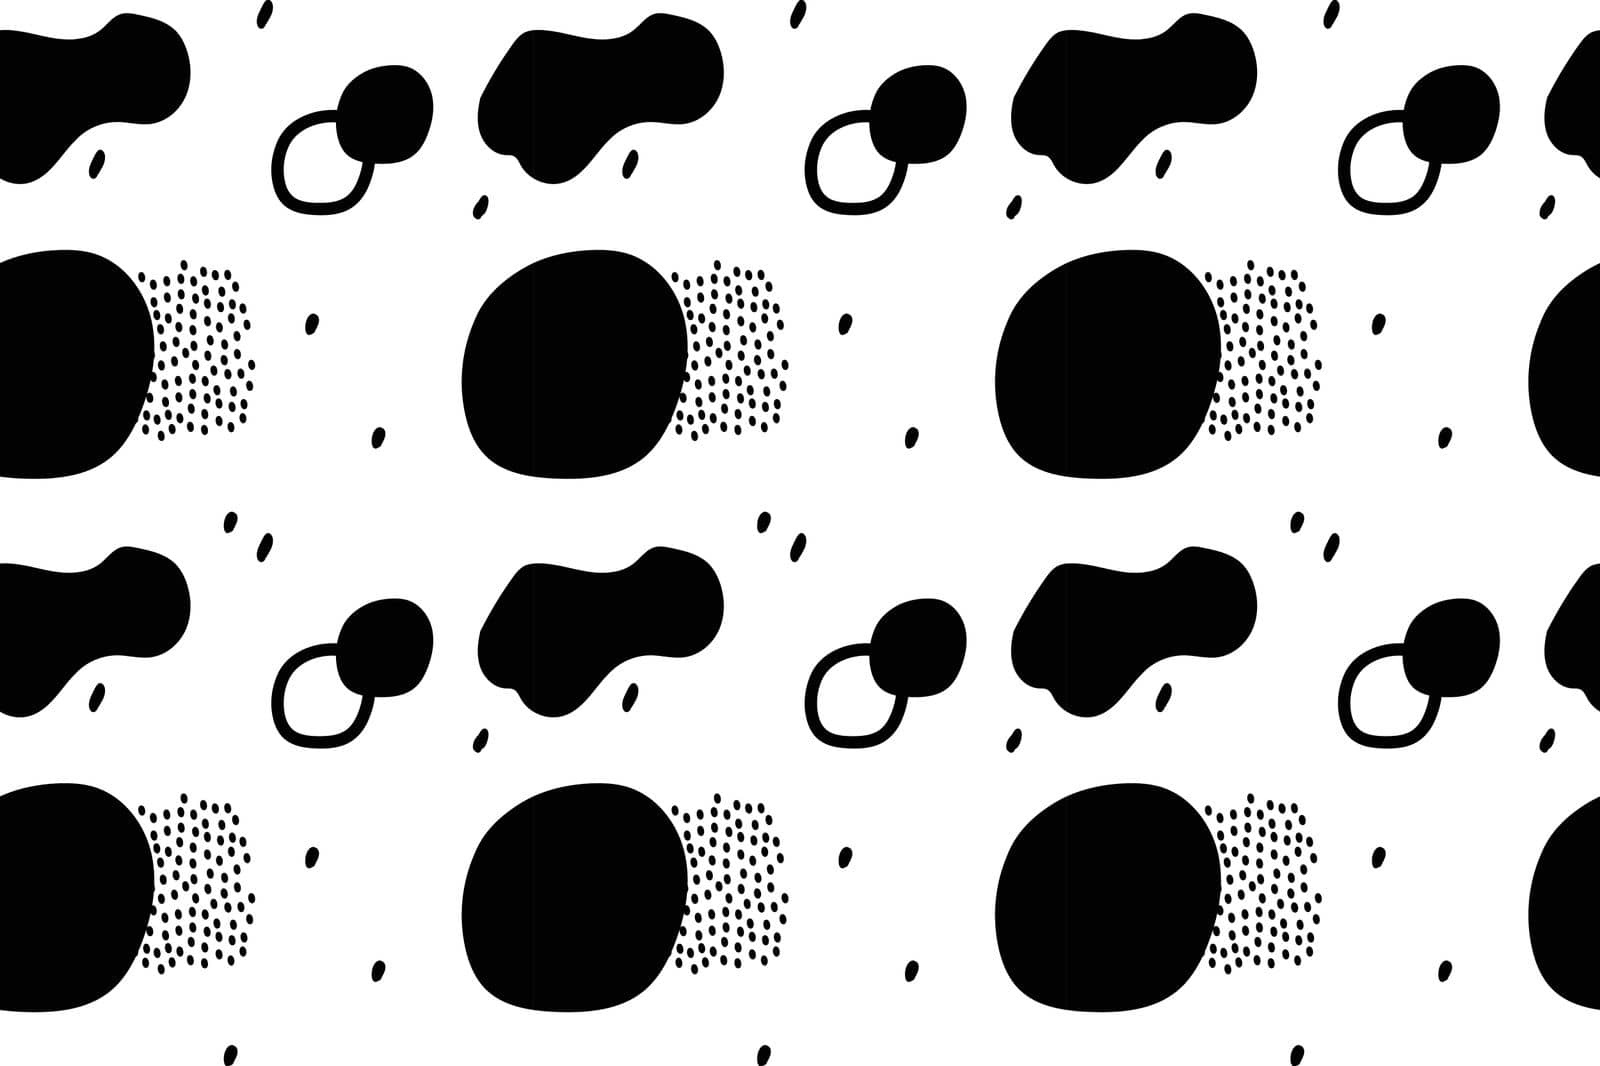 Memphis Pattern. Summer Fun Background. black and white Colors. Memphis Style Patterns. Abstract maximalistic Fun Background. Hipster Style 80s-90s. Fun pattern. Vector illustration